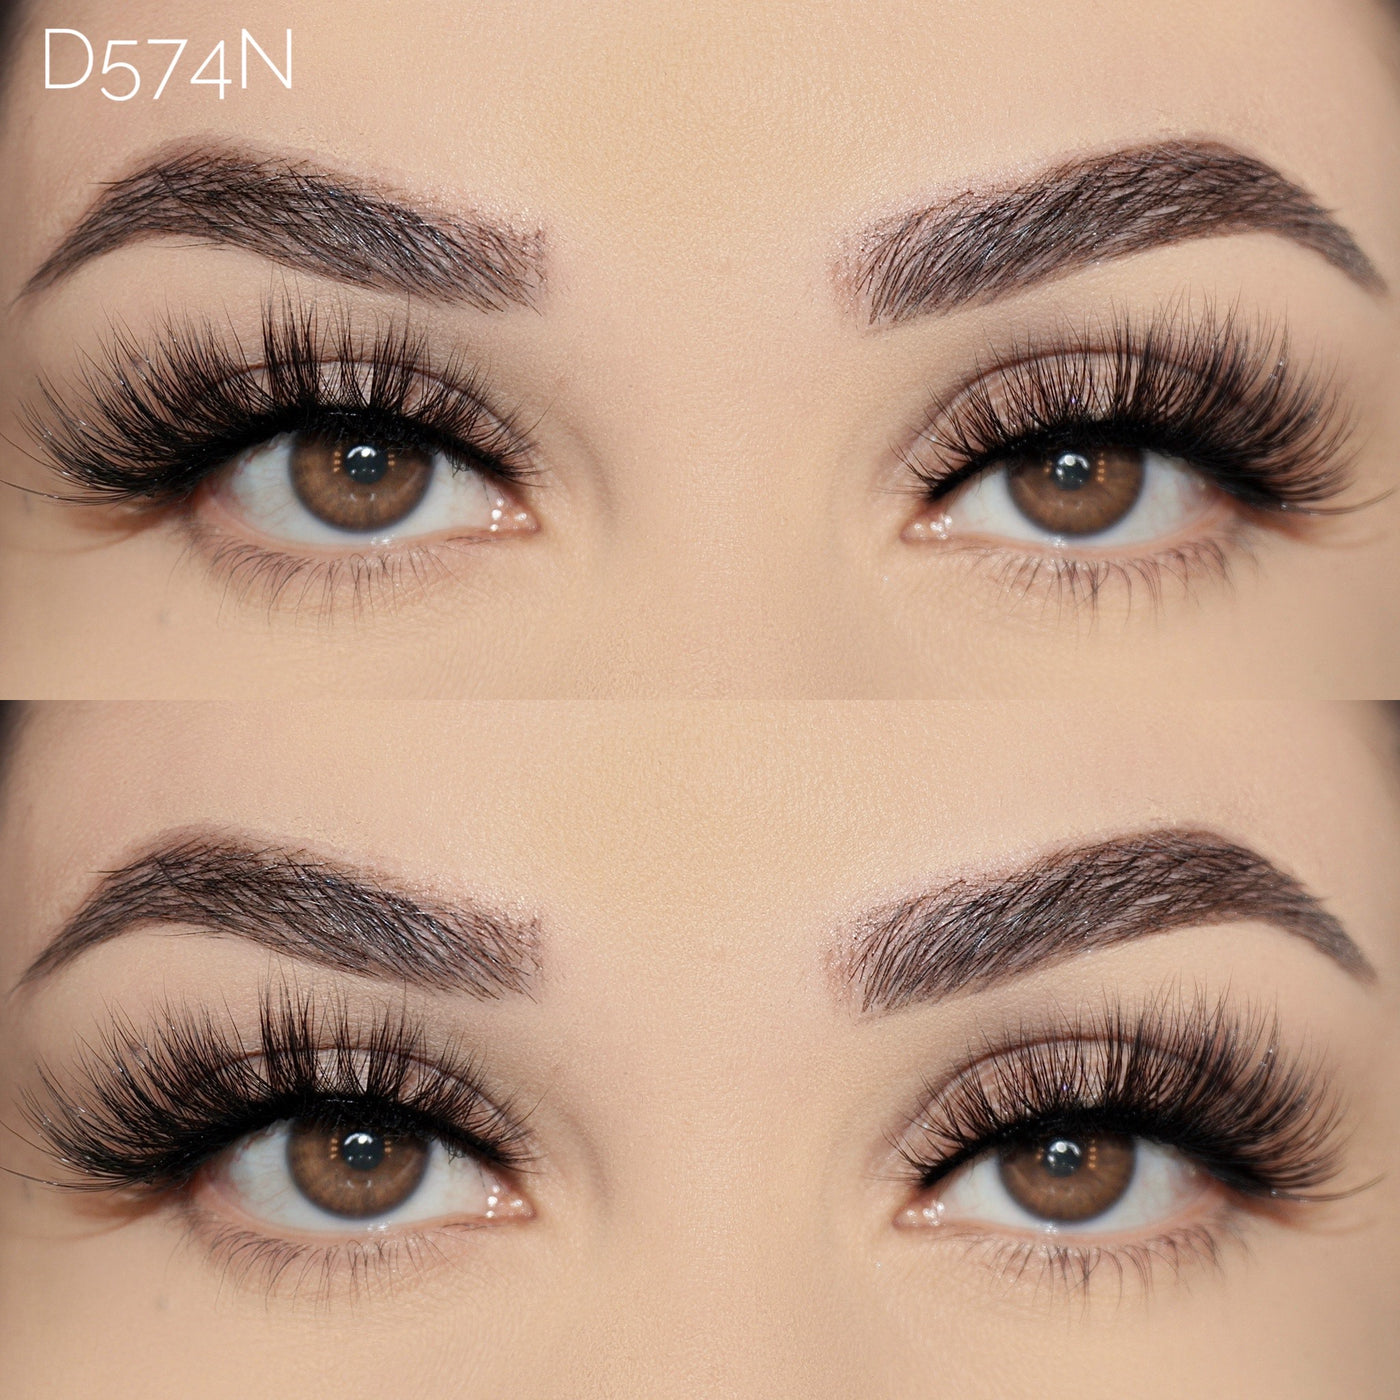 2Dadoll Cardiff 3D Faux Mink lashes(15mm)